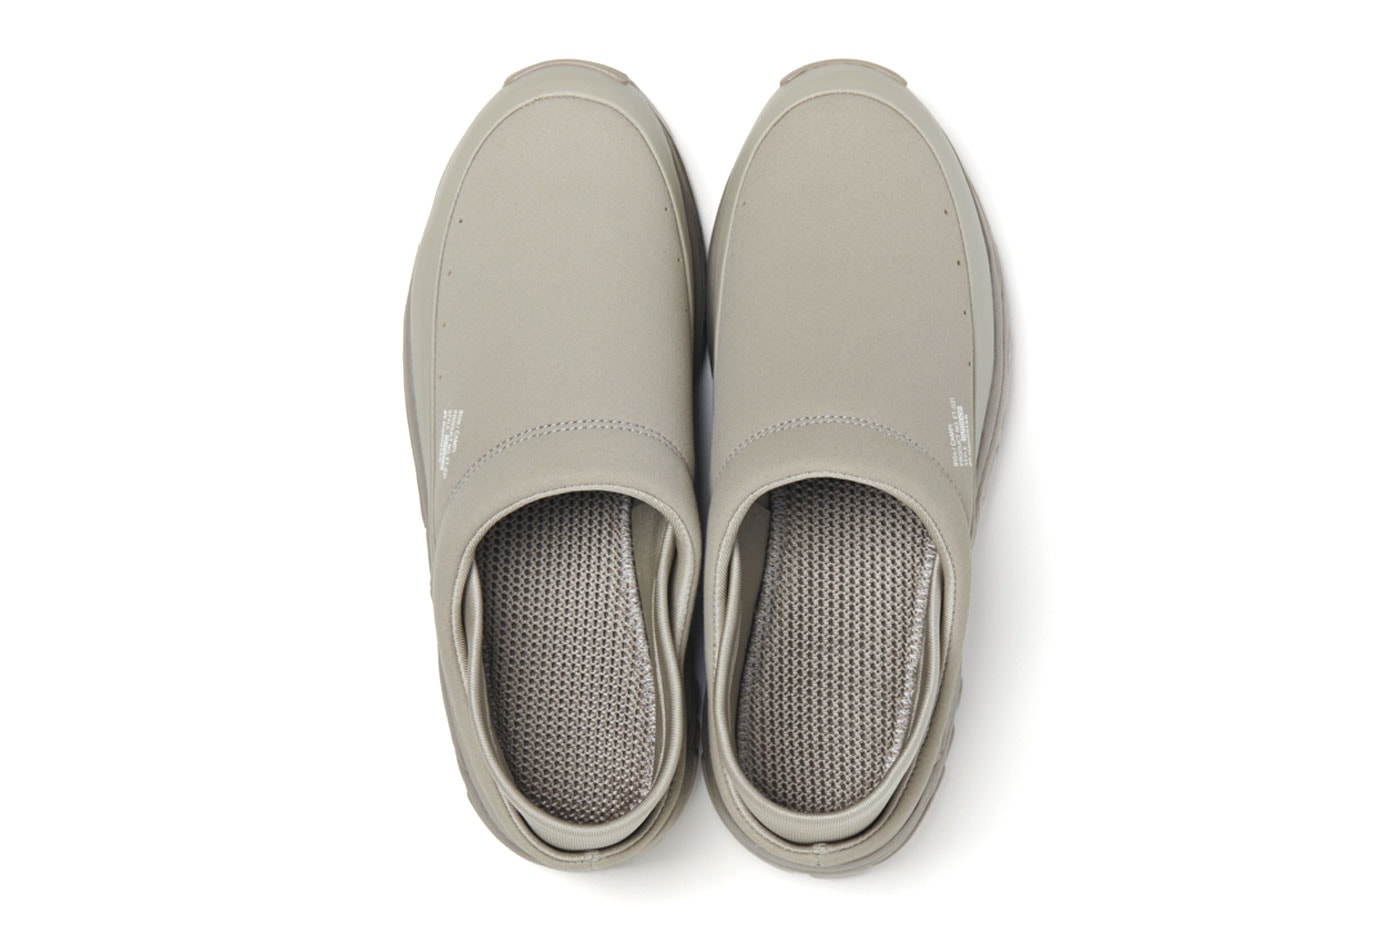 Moonstar 810s Campi Slip-Ons black grege synthetic leather mesh rubber release info